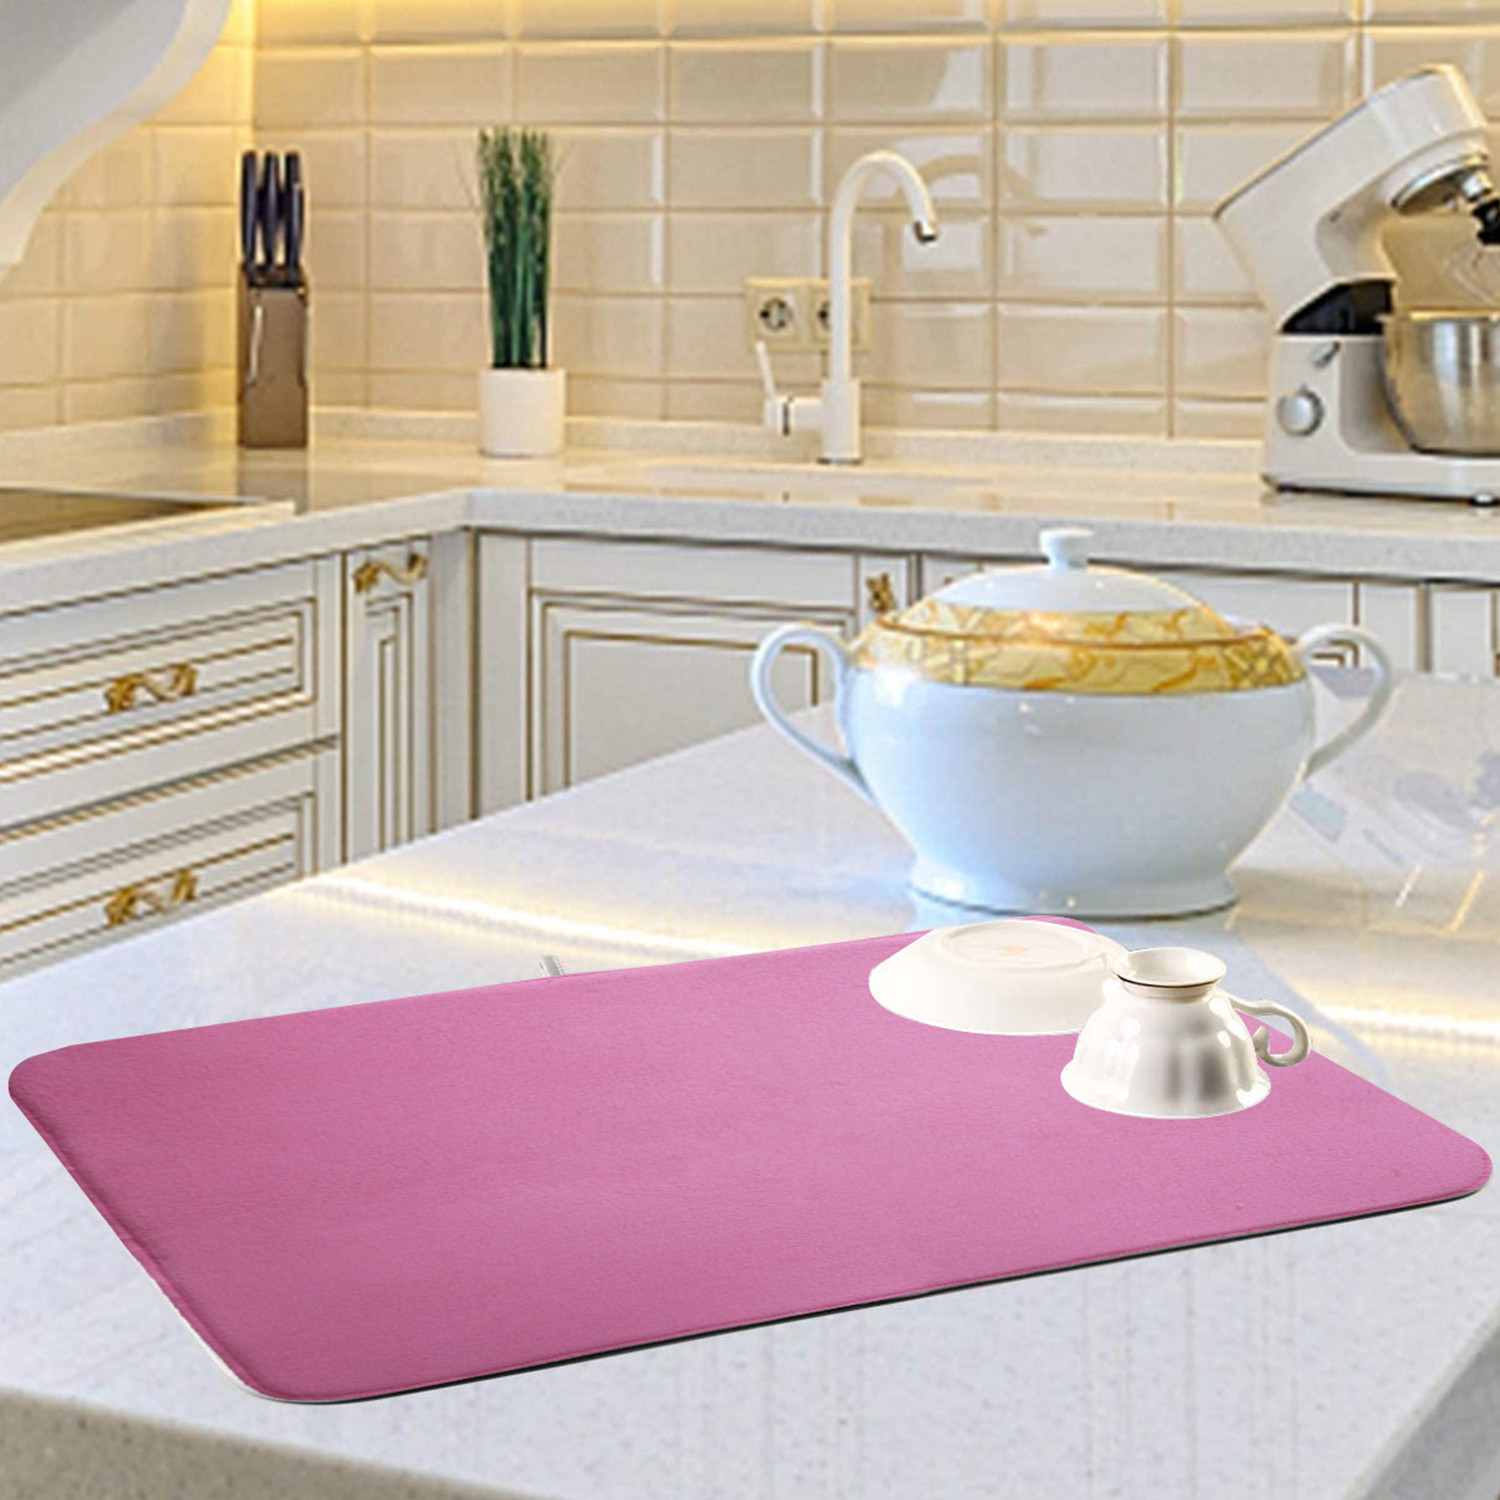 Kuber Industries Microfiber Reversible Dish Drying Mat With Absorbent Parity For Kitchen 27